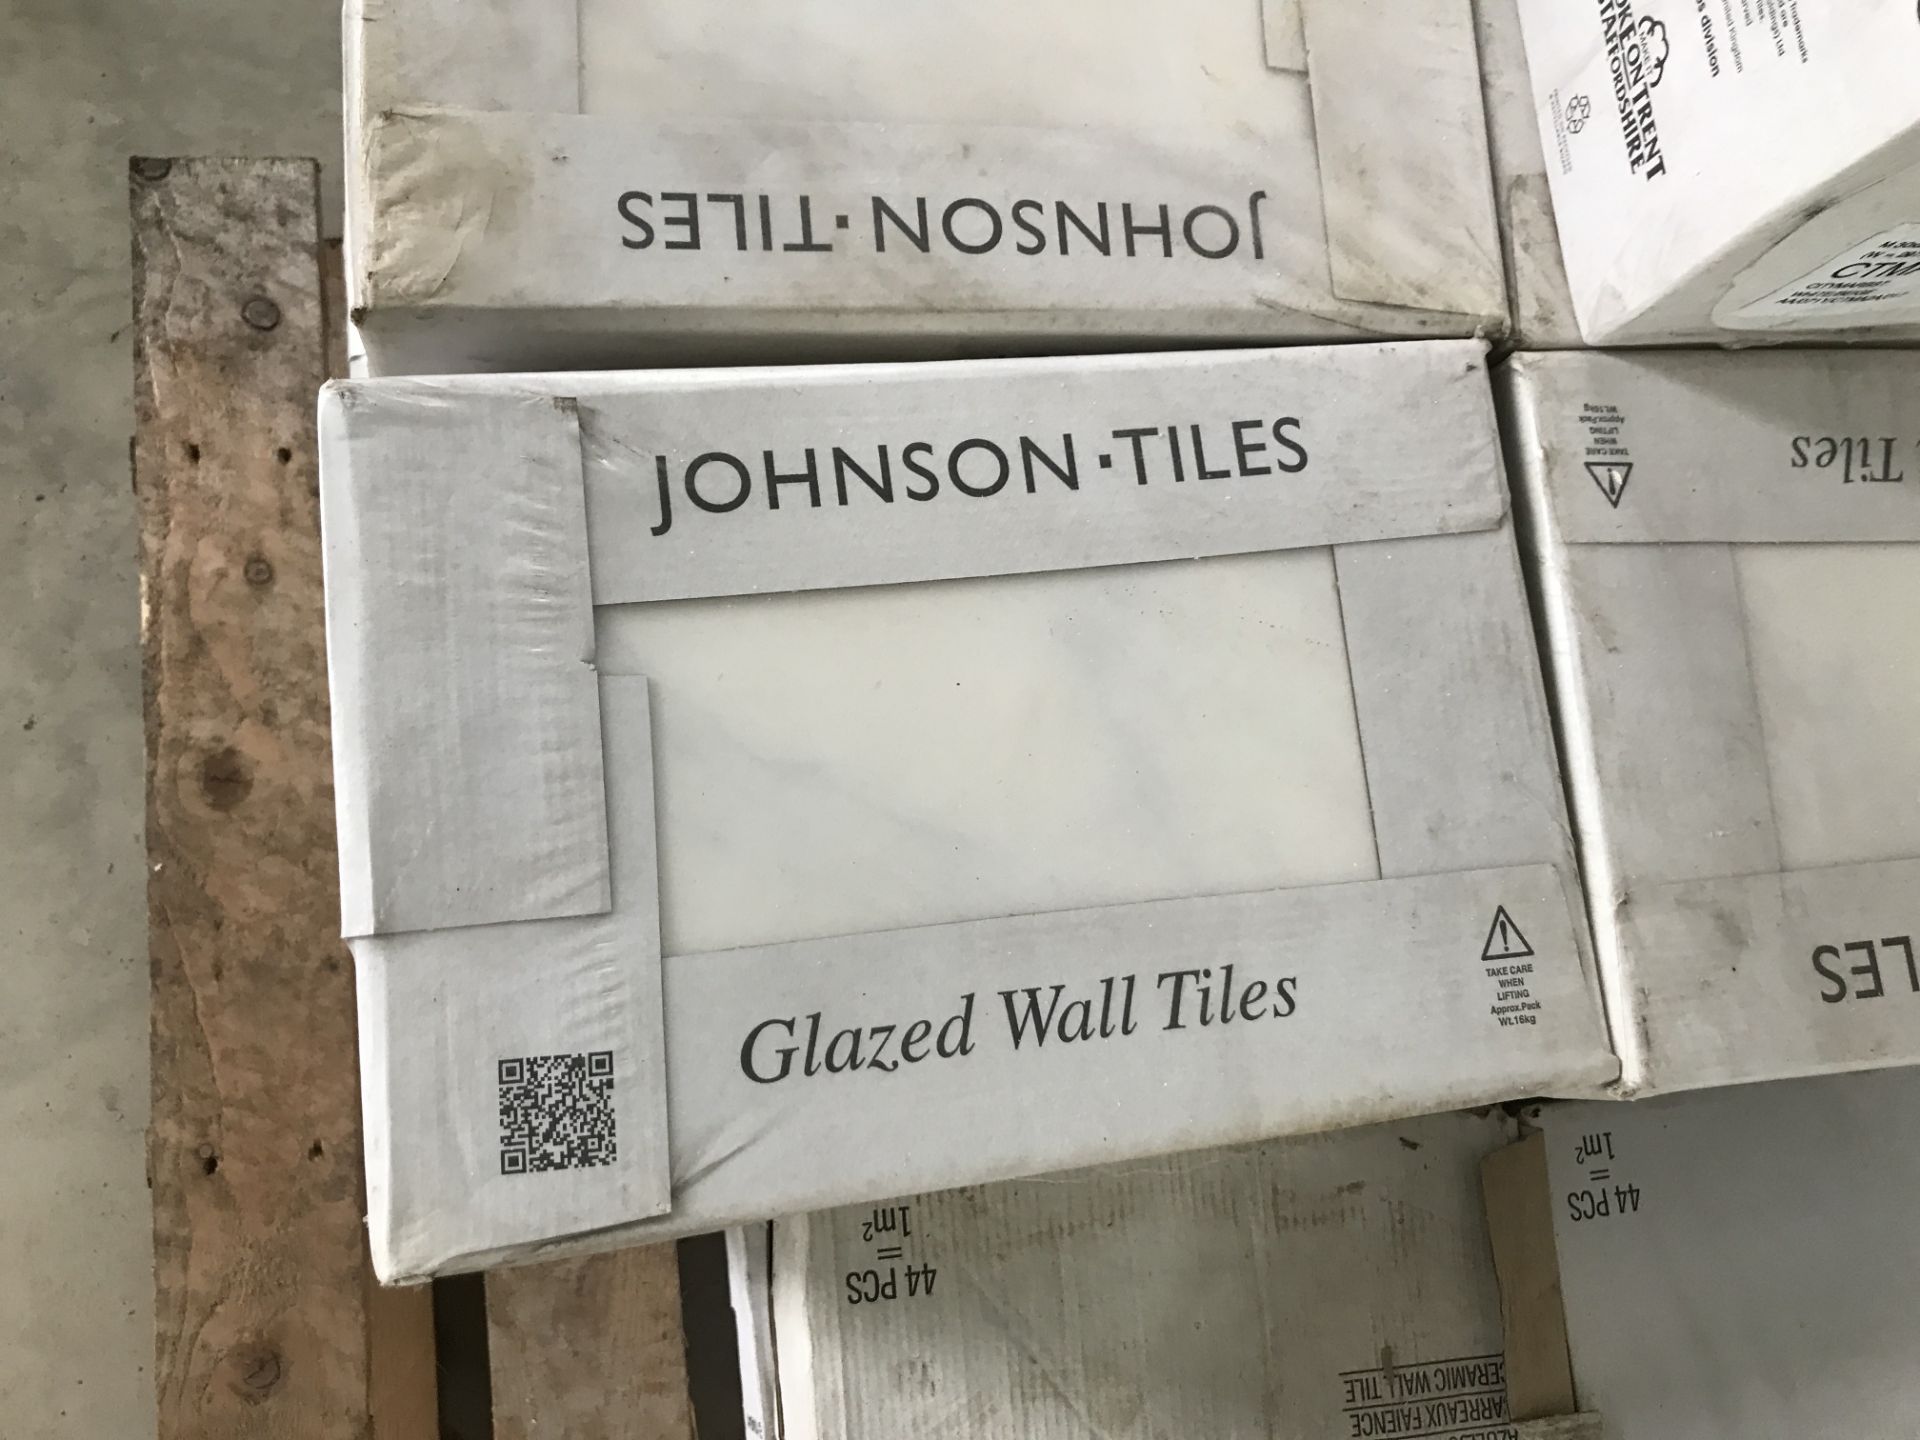 Quantity of 15 x 15 Ceramic Wall Tiles and Johnson Tiles Glazed Wall Tiles, as set out on pallet - Image 3 of 3